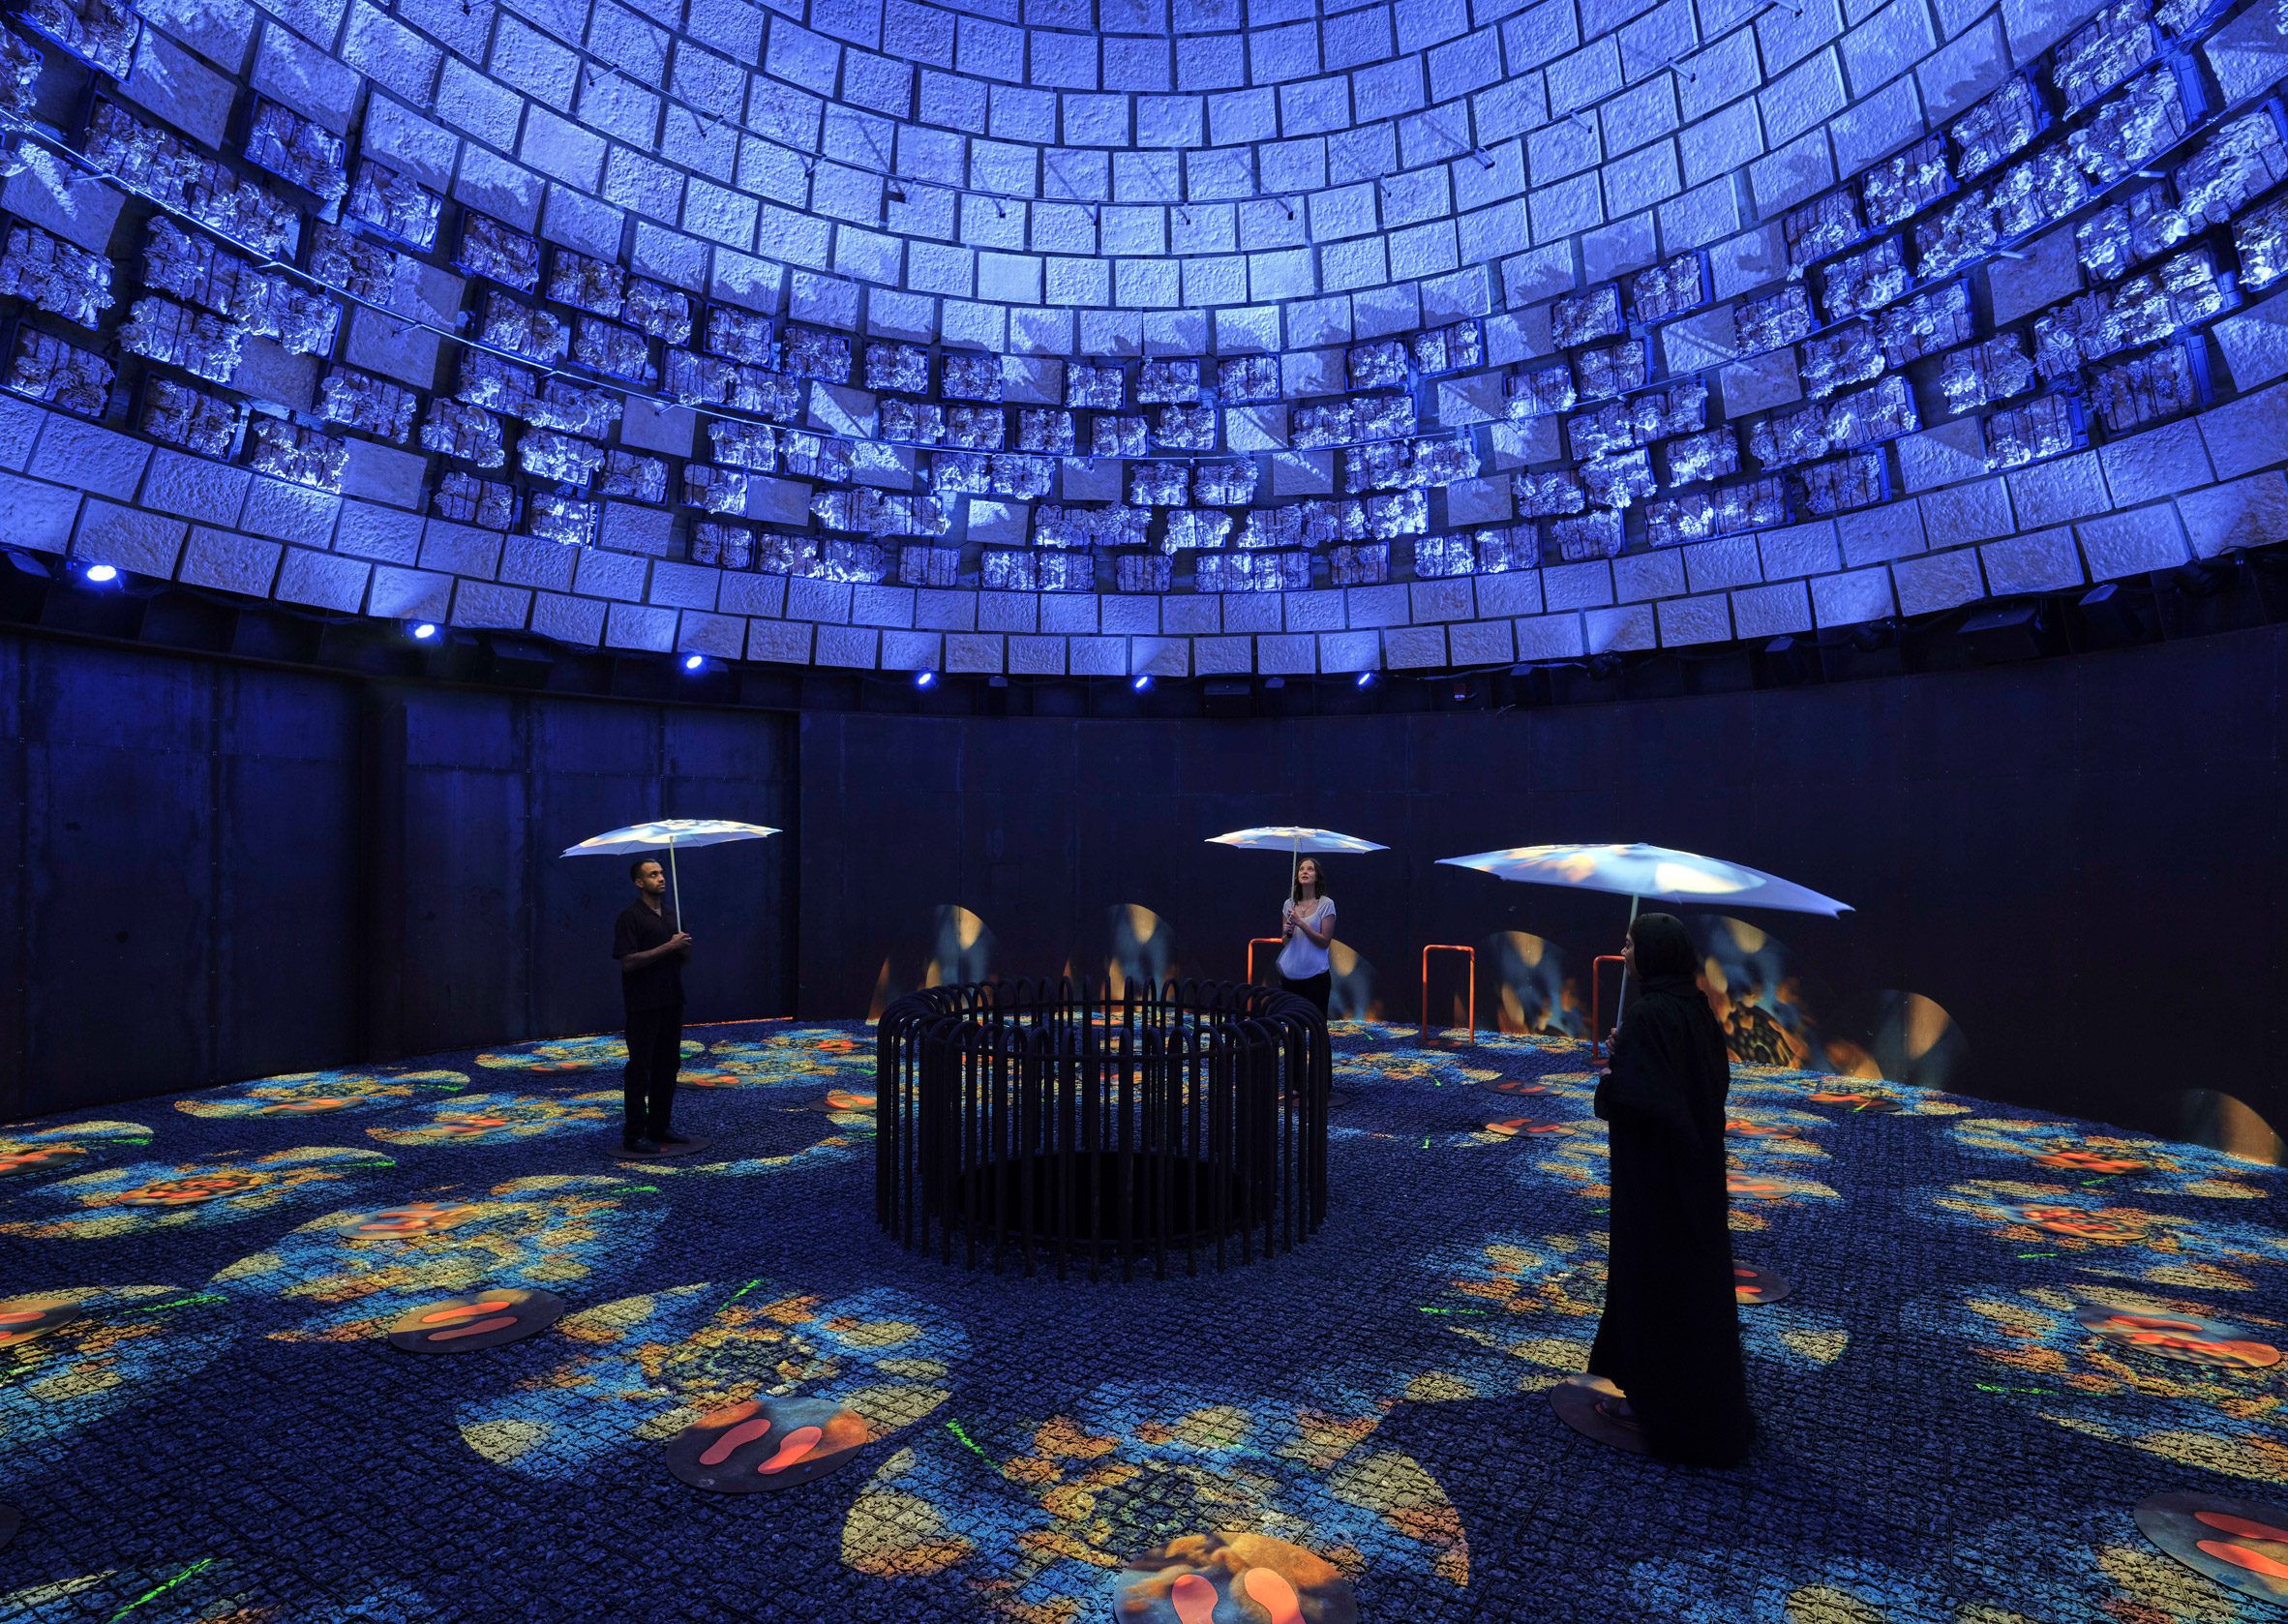 People with umbrellas stand in a dark, circular space with projections on the floor